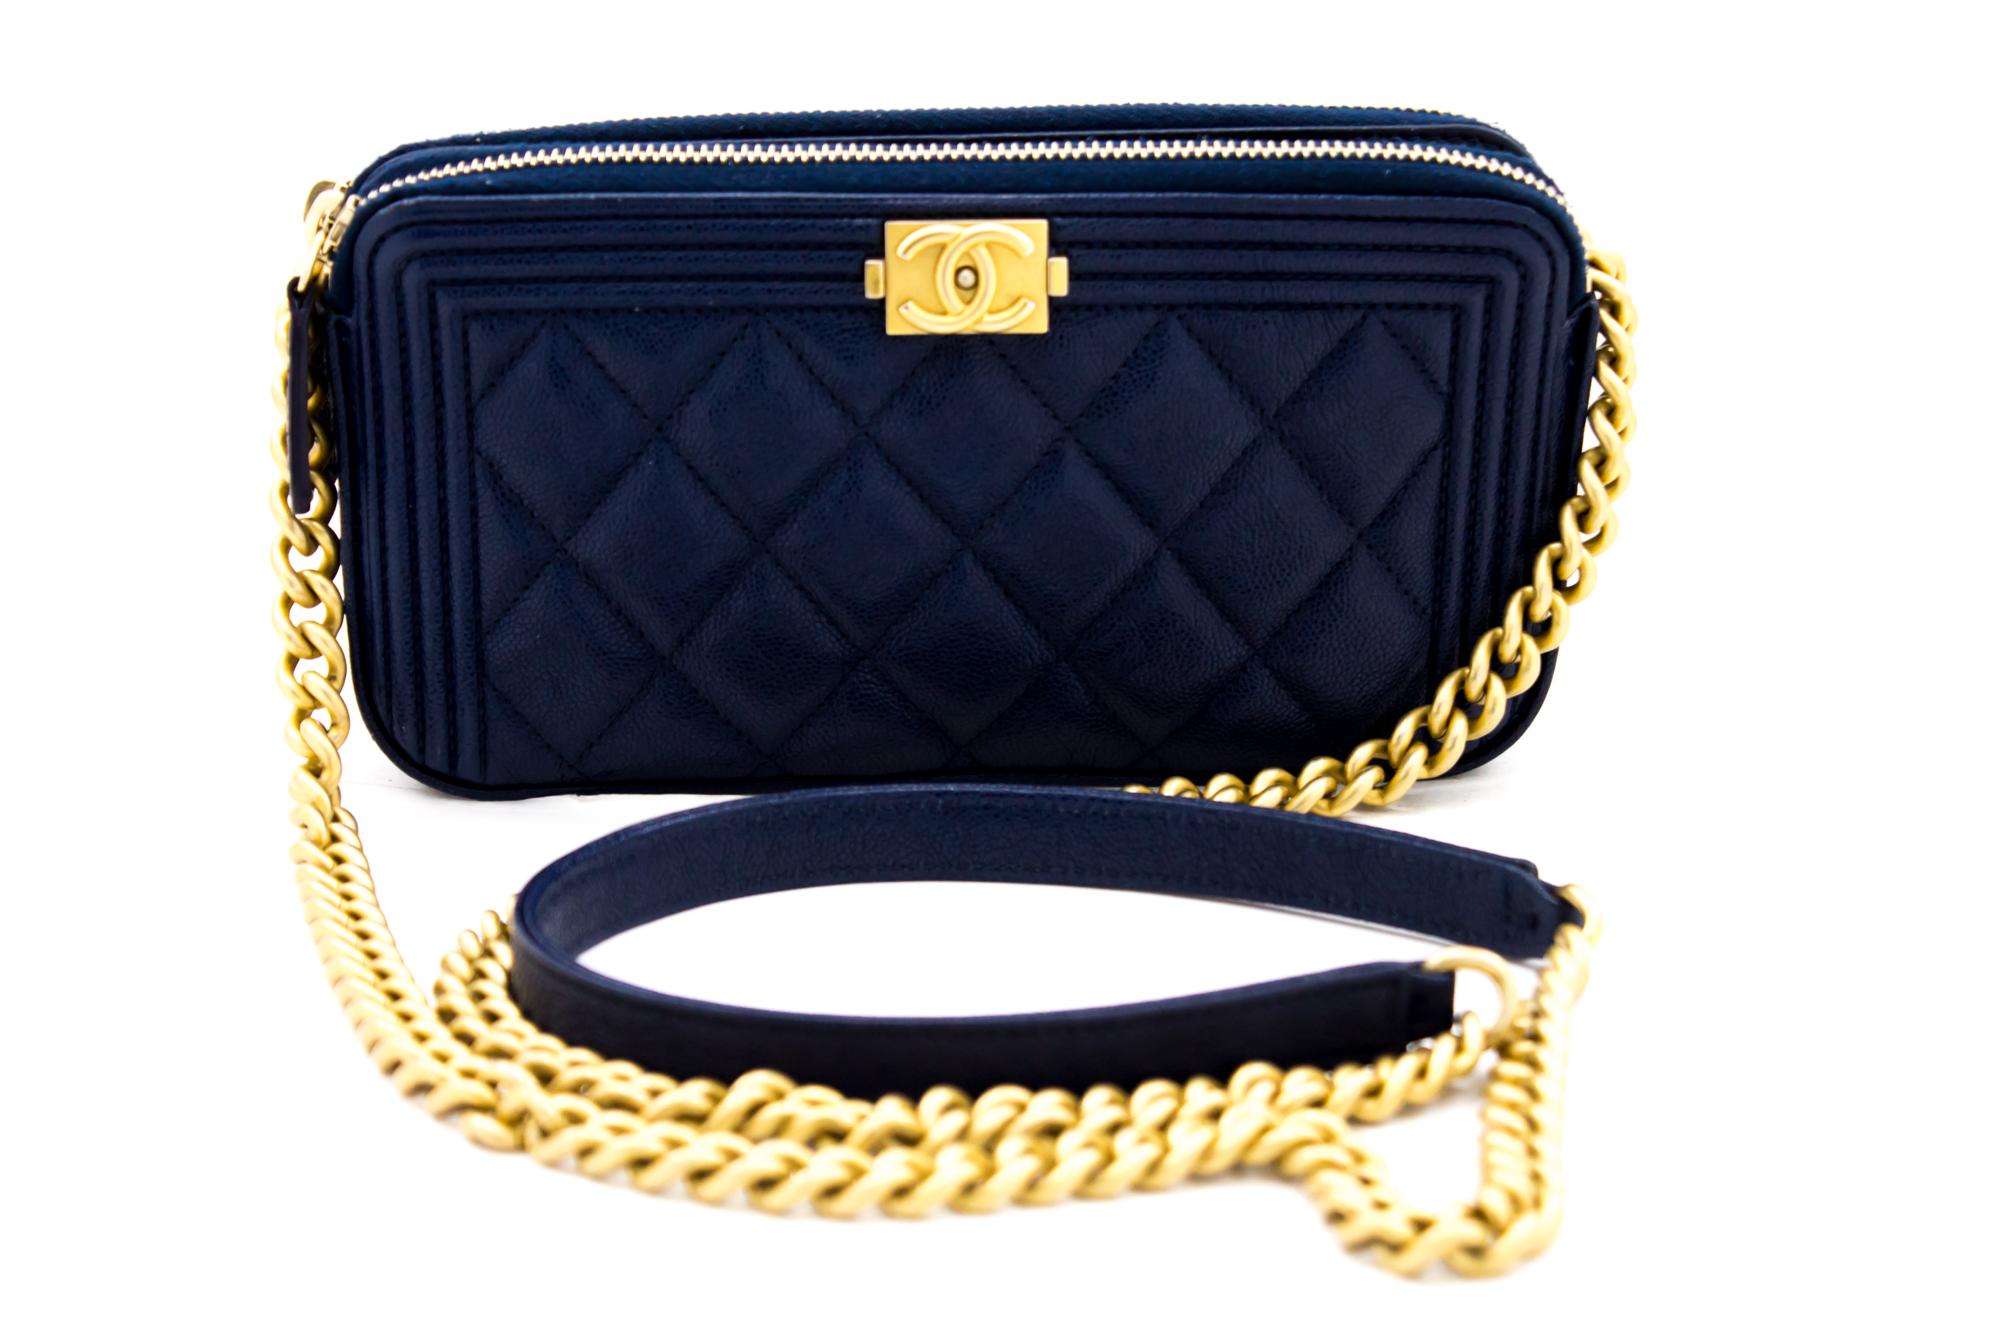 An authentic CHANEL Boy Navy Caviar Wallet On Chain WOC Double Zip Shoulder Bag. The color is Navy. The outside material is Leather. The pattern is Solid. This item is Contemporary. The year of manufacture would be 2019.
Conditions & Ratings
Outside